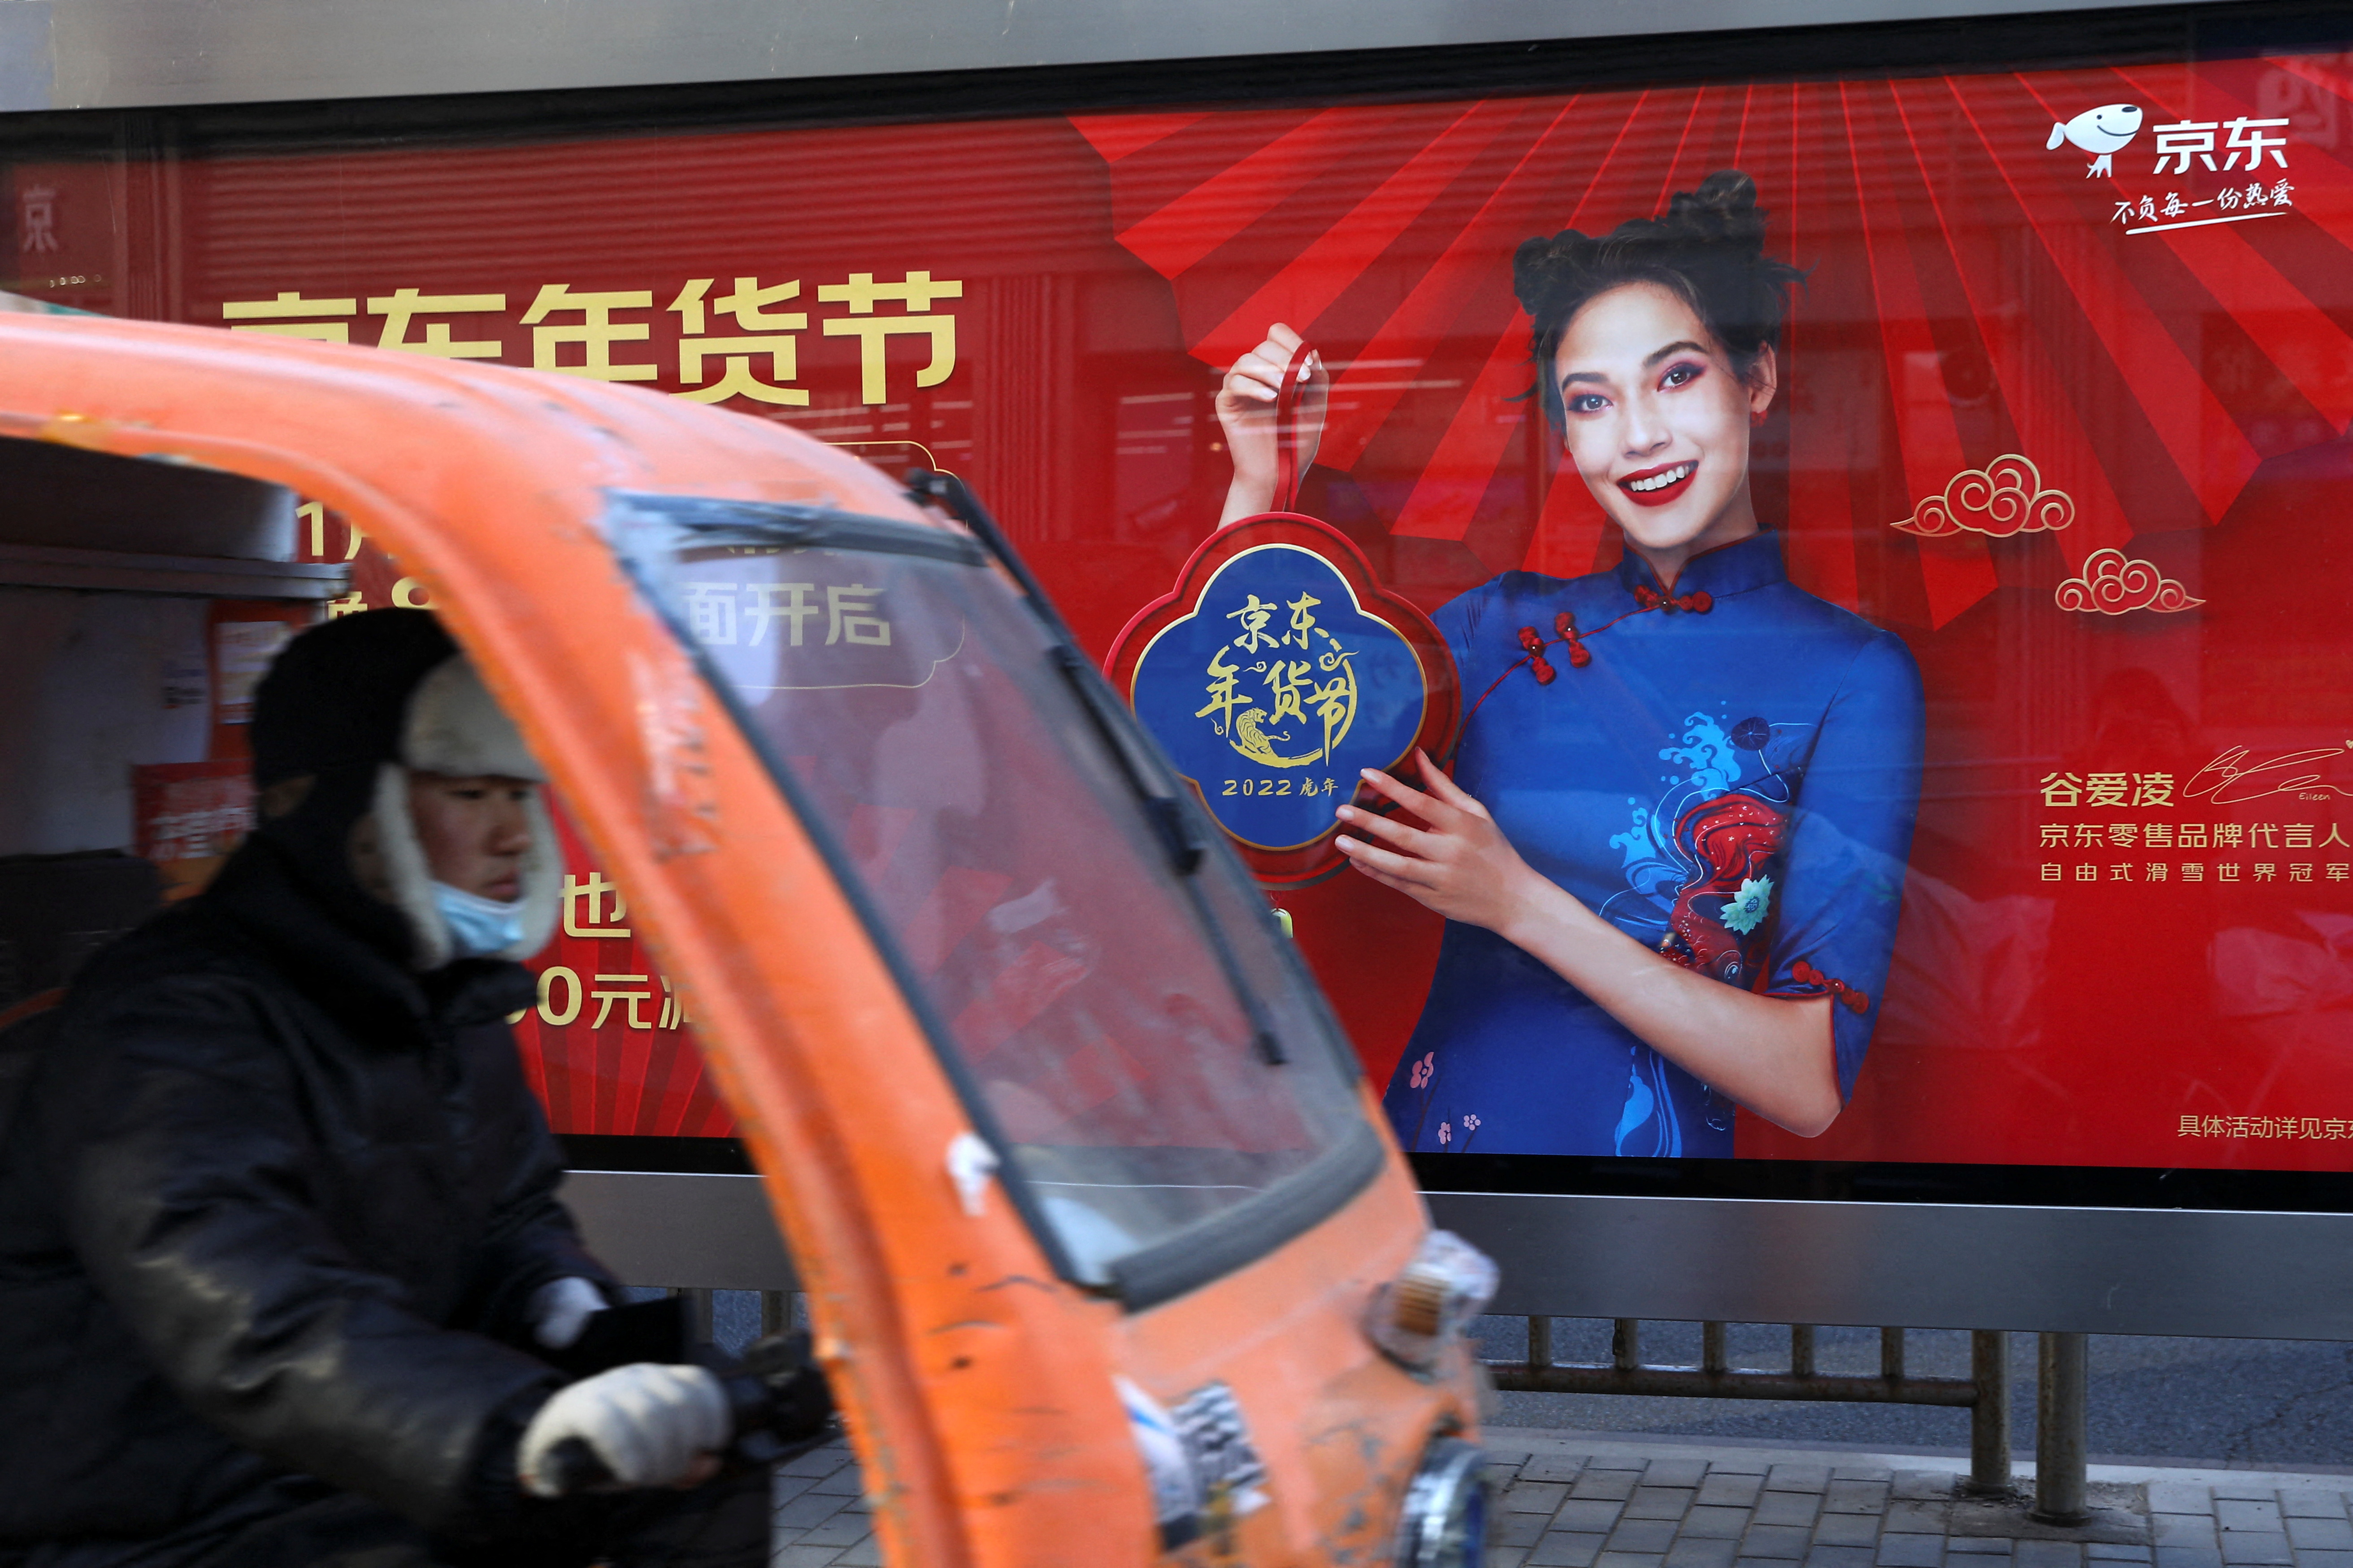 Advertisement with an image of Eileen Gu at a bus stop in Beijing